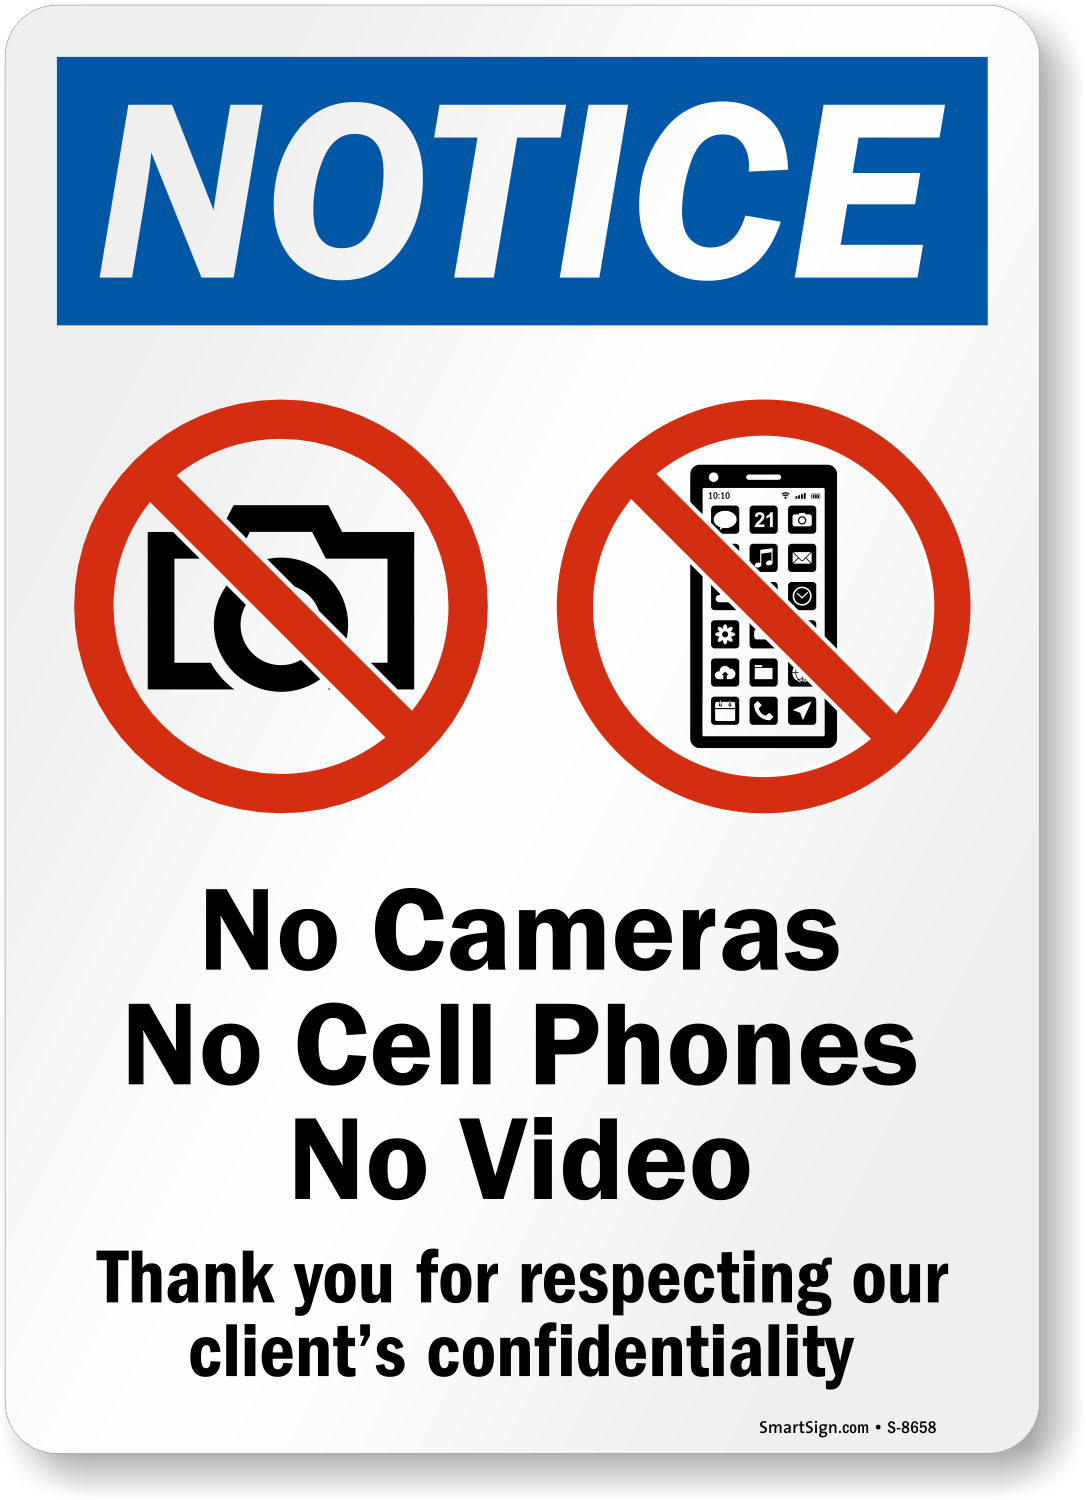 Notice. No cellphones sign. Signs and Notices. Фото Notice a sign.